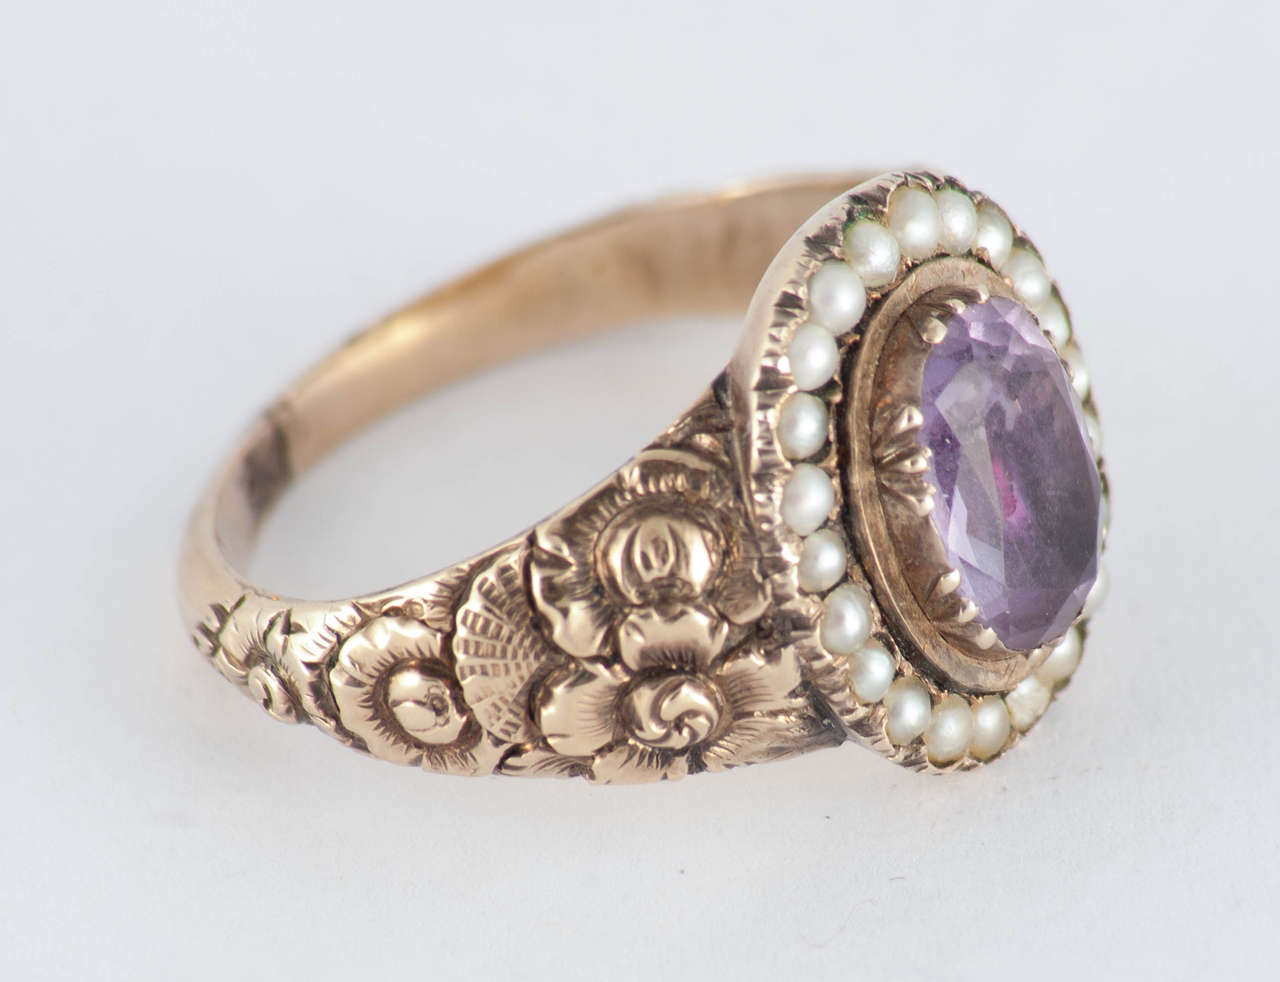 Wonderful Georgian amethyst ring in a fantastic 18K gold repose setting and surrounded by pearls. The ring is a size 7 1/2 and measures approximately 5/8